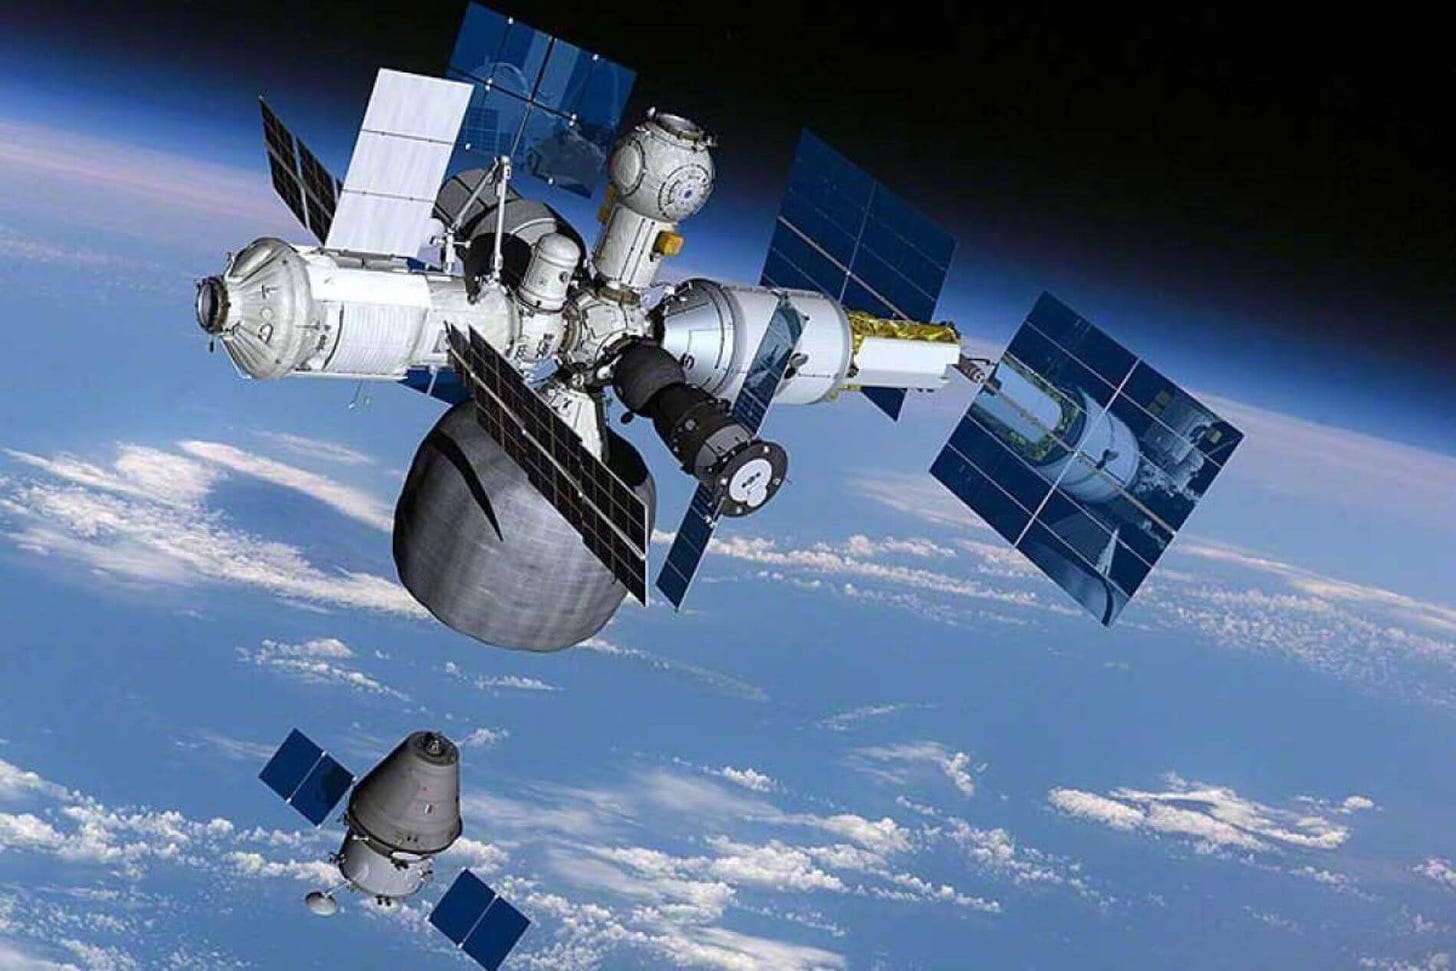 ROSS, the new Russian space station: when and why?